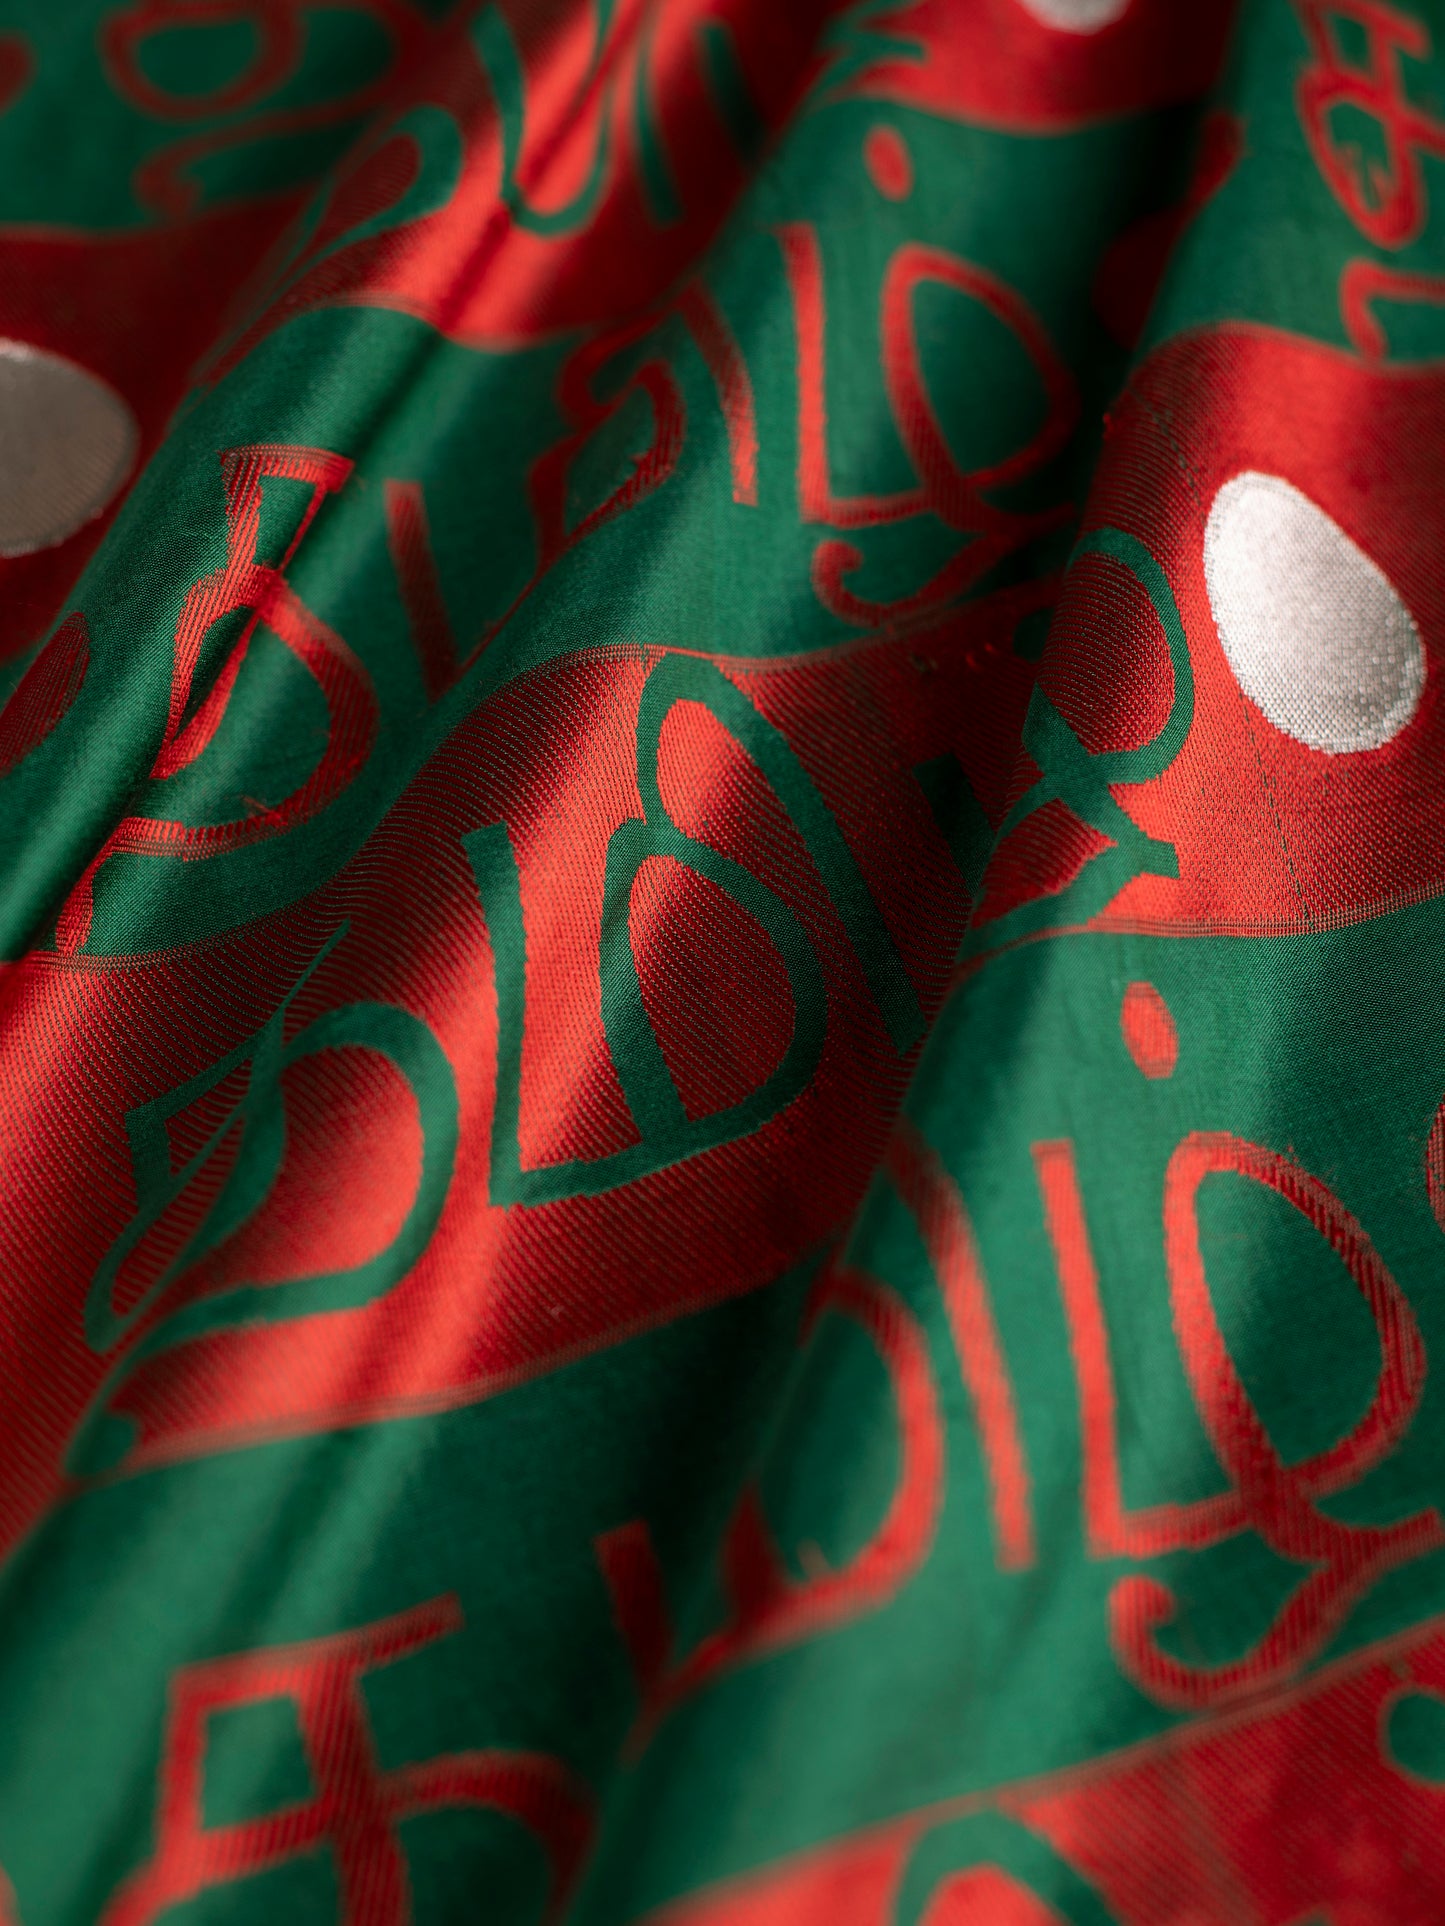 Handwoven Green and Red Silk Fabric